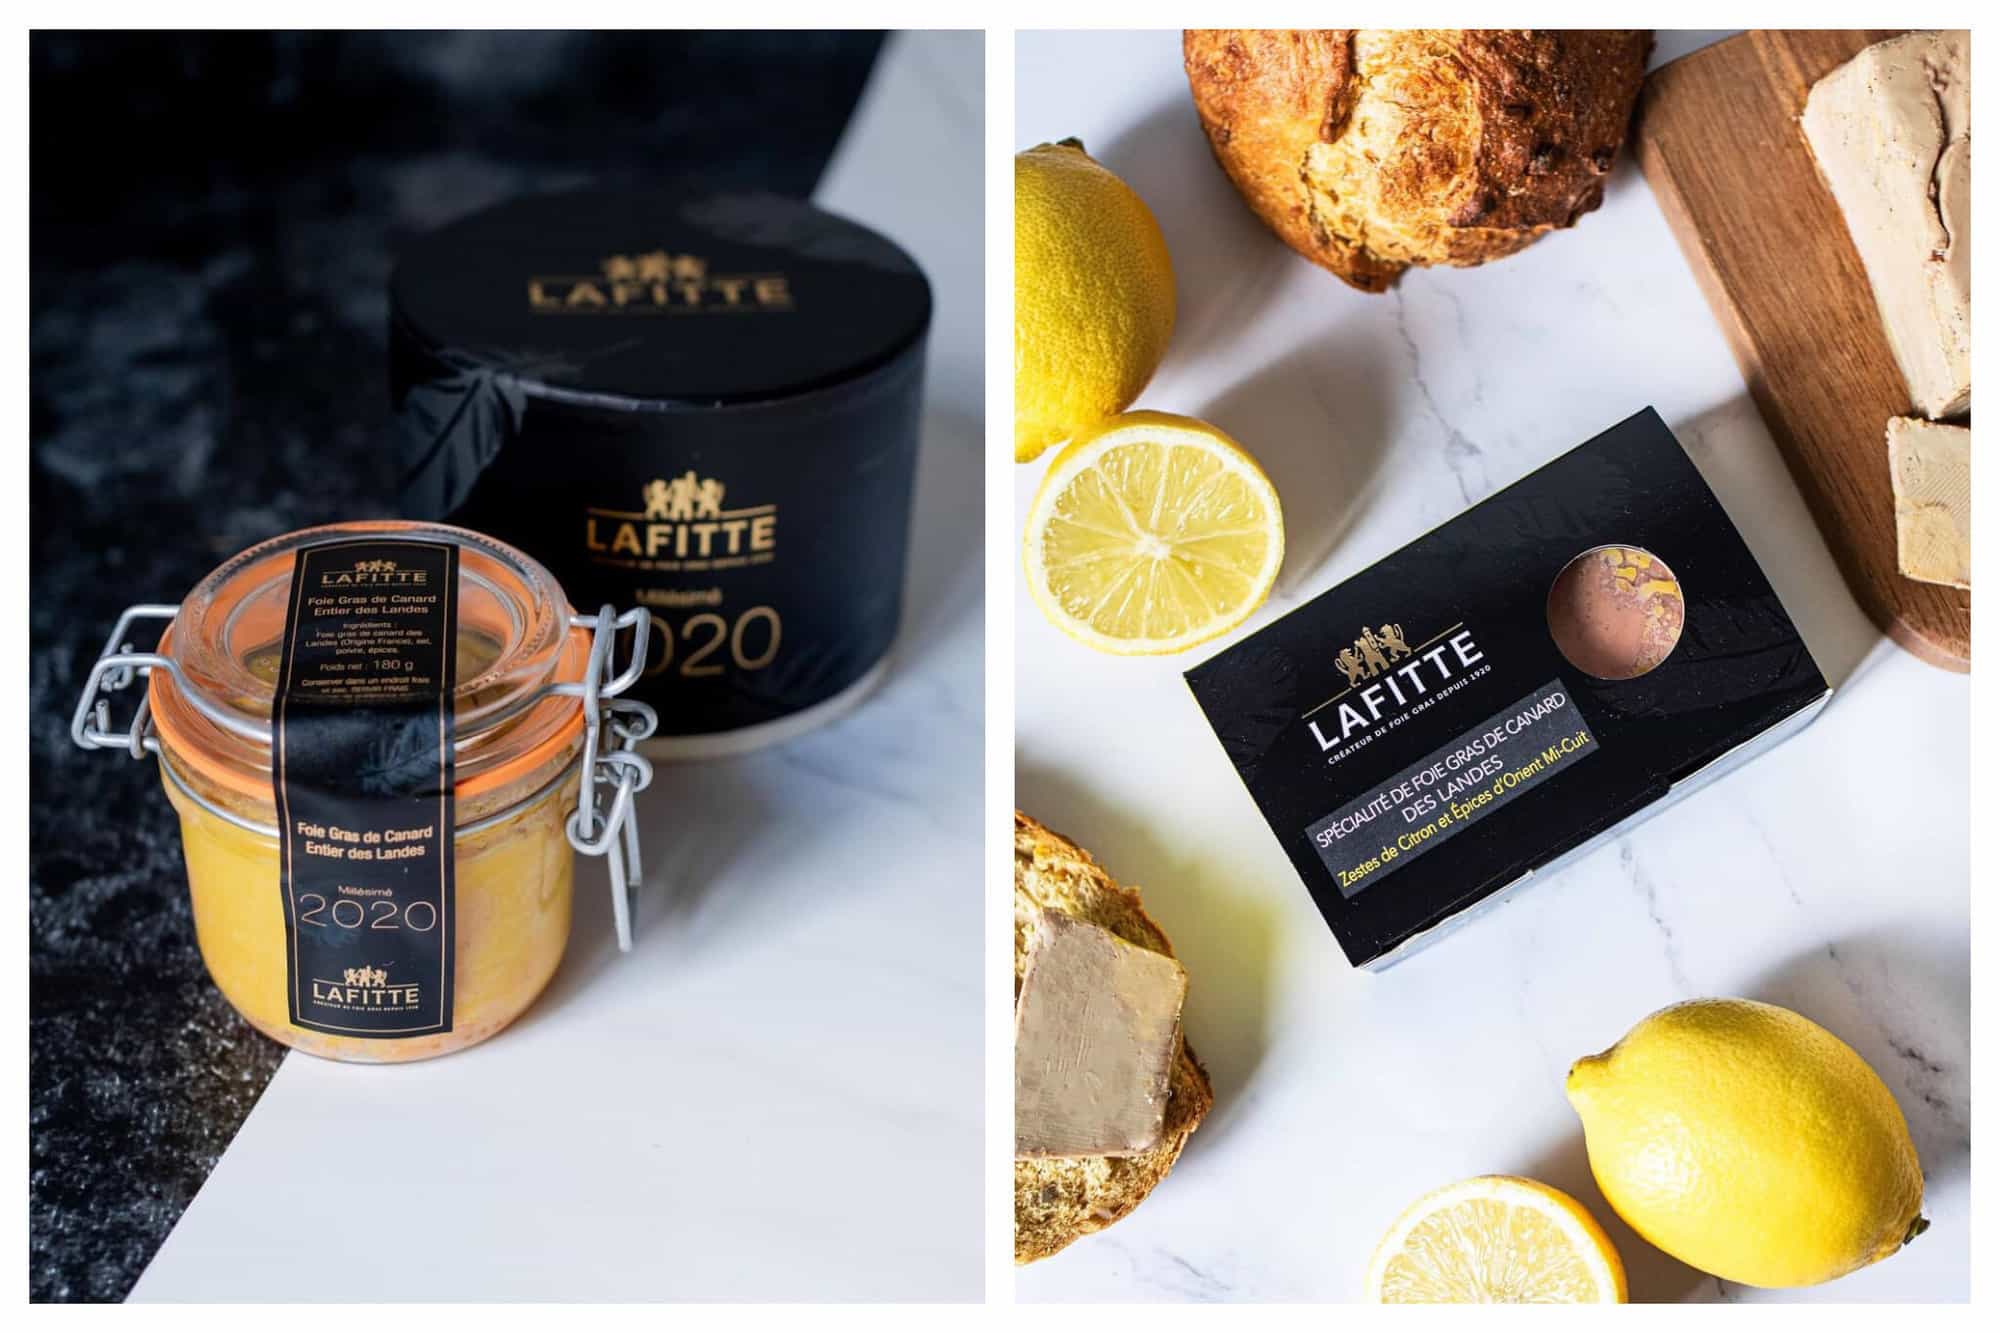 Left: a jar of Masion Lafitte fois gras with a round black box to hold it. It is on a black and white surface. Right: an aerial view of Maison Lafitte fois gras. There is a cutting board with fois gras, a slice of bread, a loaf of bread, and several lemons visible. 